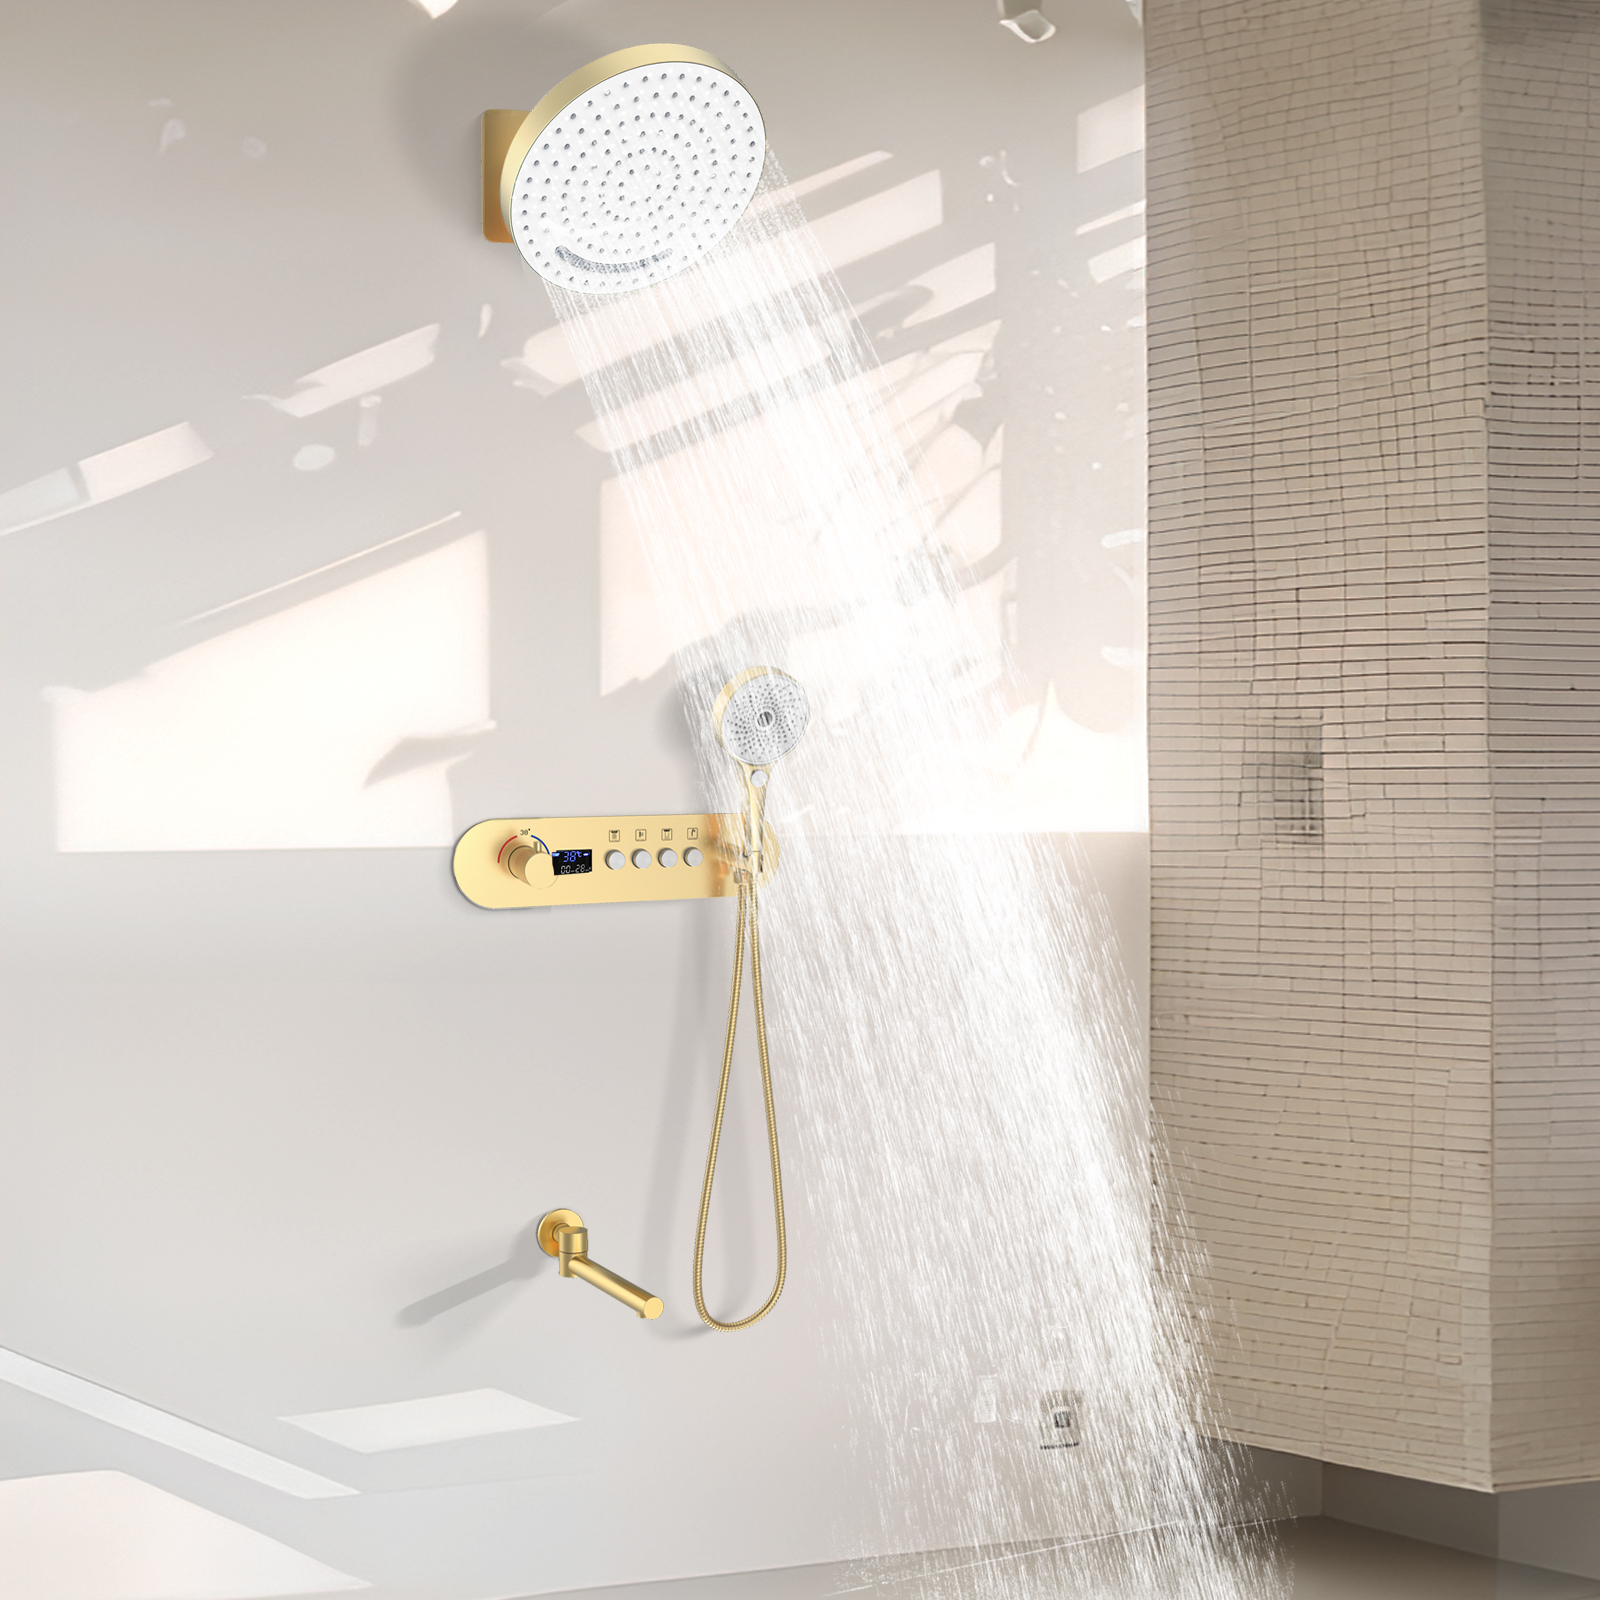 Bathroom Rainfall Waterfall Hengmohon Faucet with Shower Spray And Outlet Function Shower